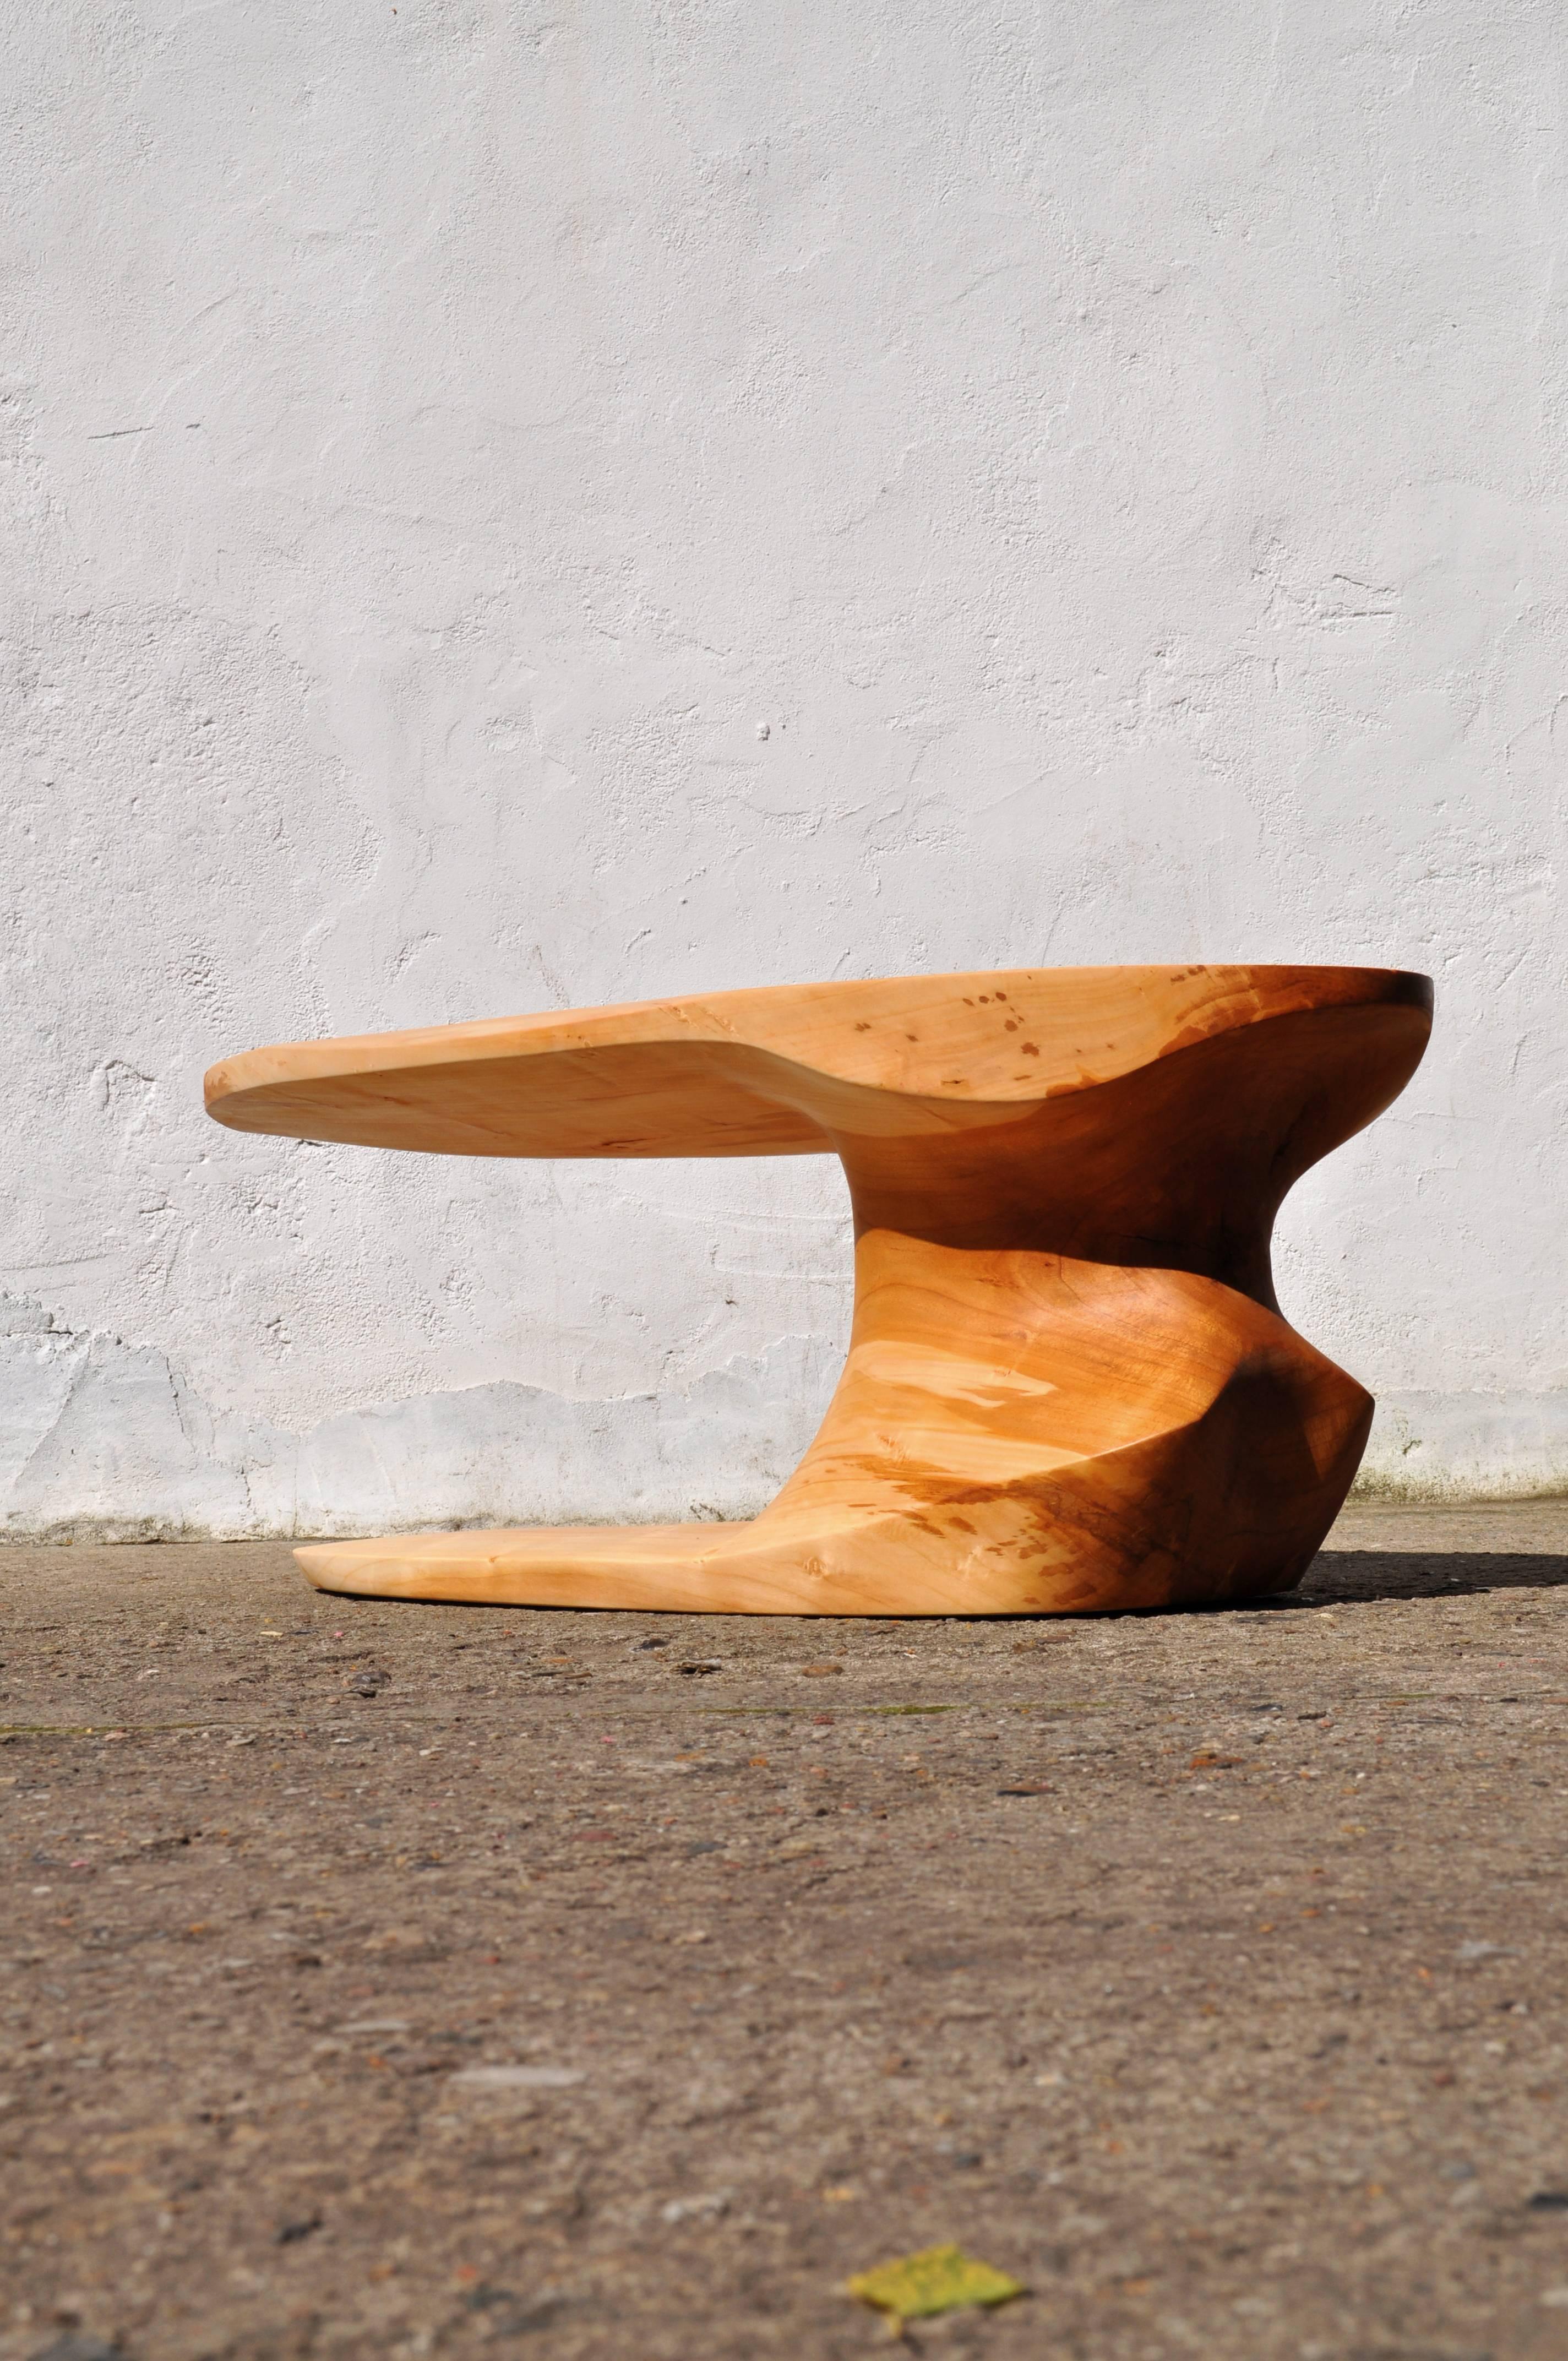 Unique Signed table by Jörg Pietschmann
Table · Willow
Measures: H 43 x W 118 x D 45 cm
Carved from a solid block of an old willow tree. Polished oil finish


In Pietschmann’s sculptures, trees that for centuries were part of a landscape and